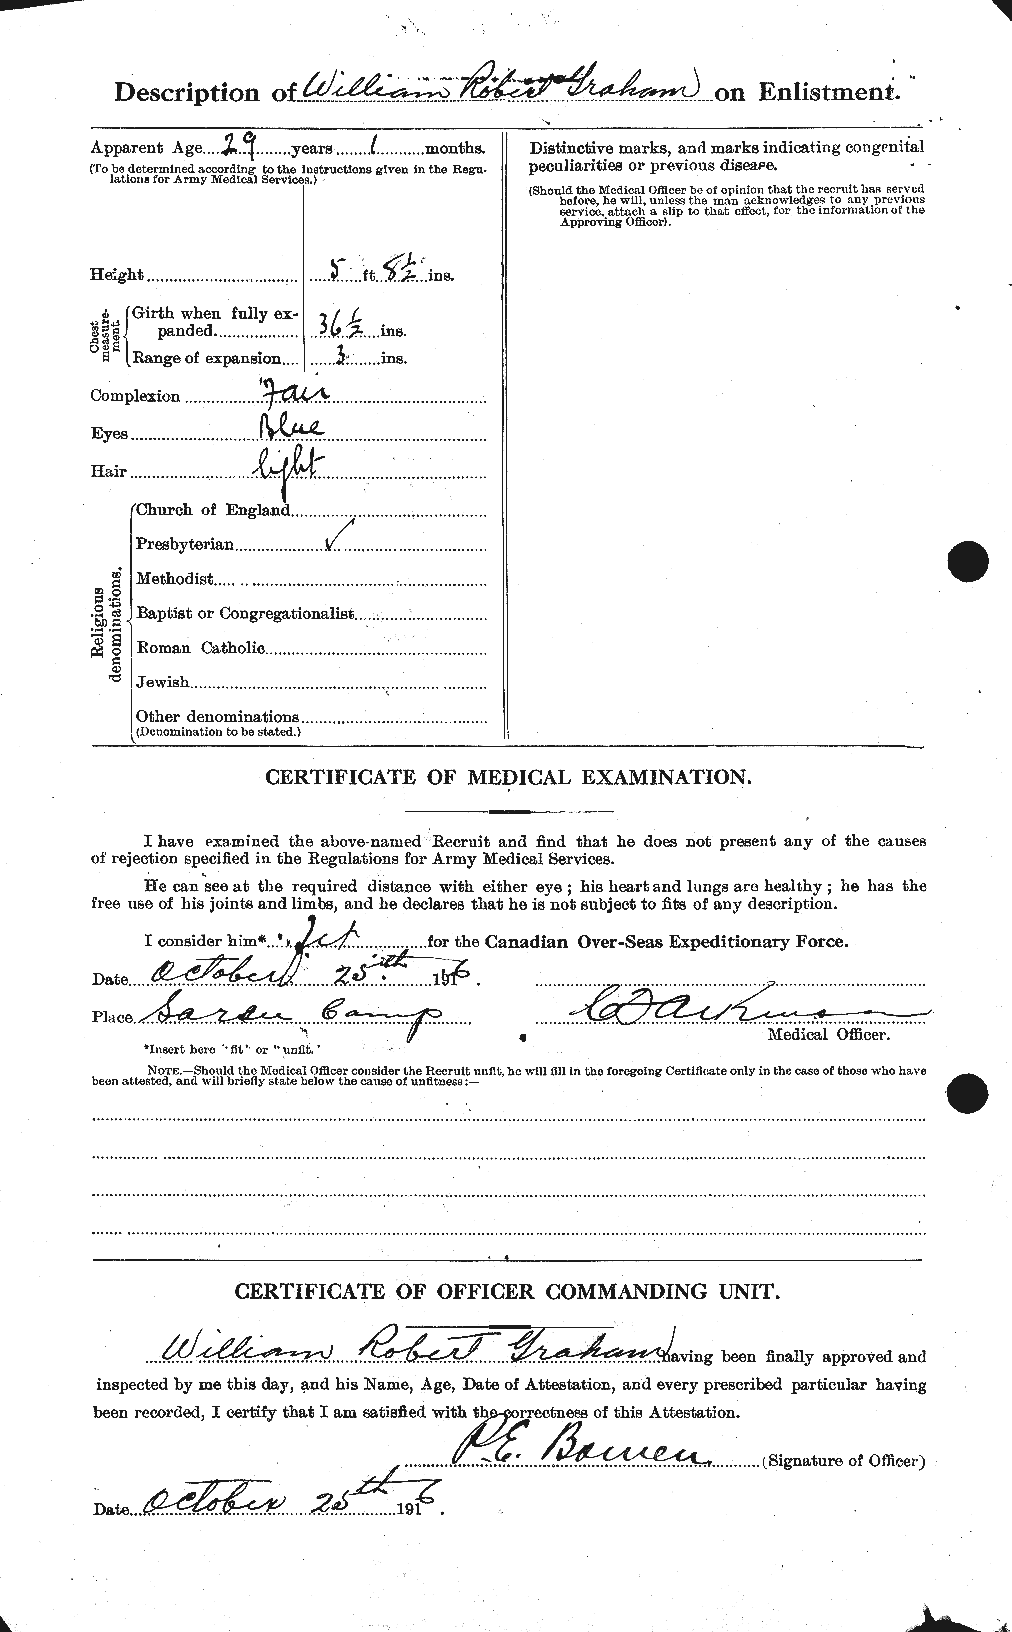 Personnel Records of the First World War - CEF 358035b